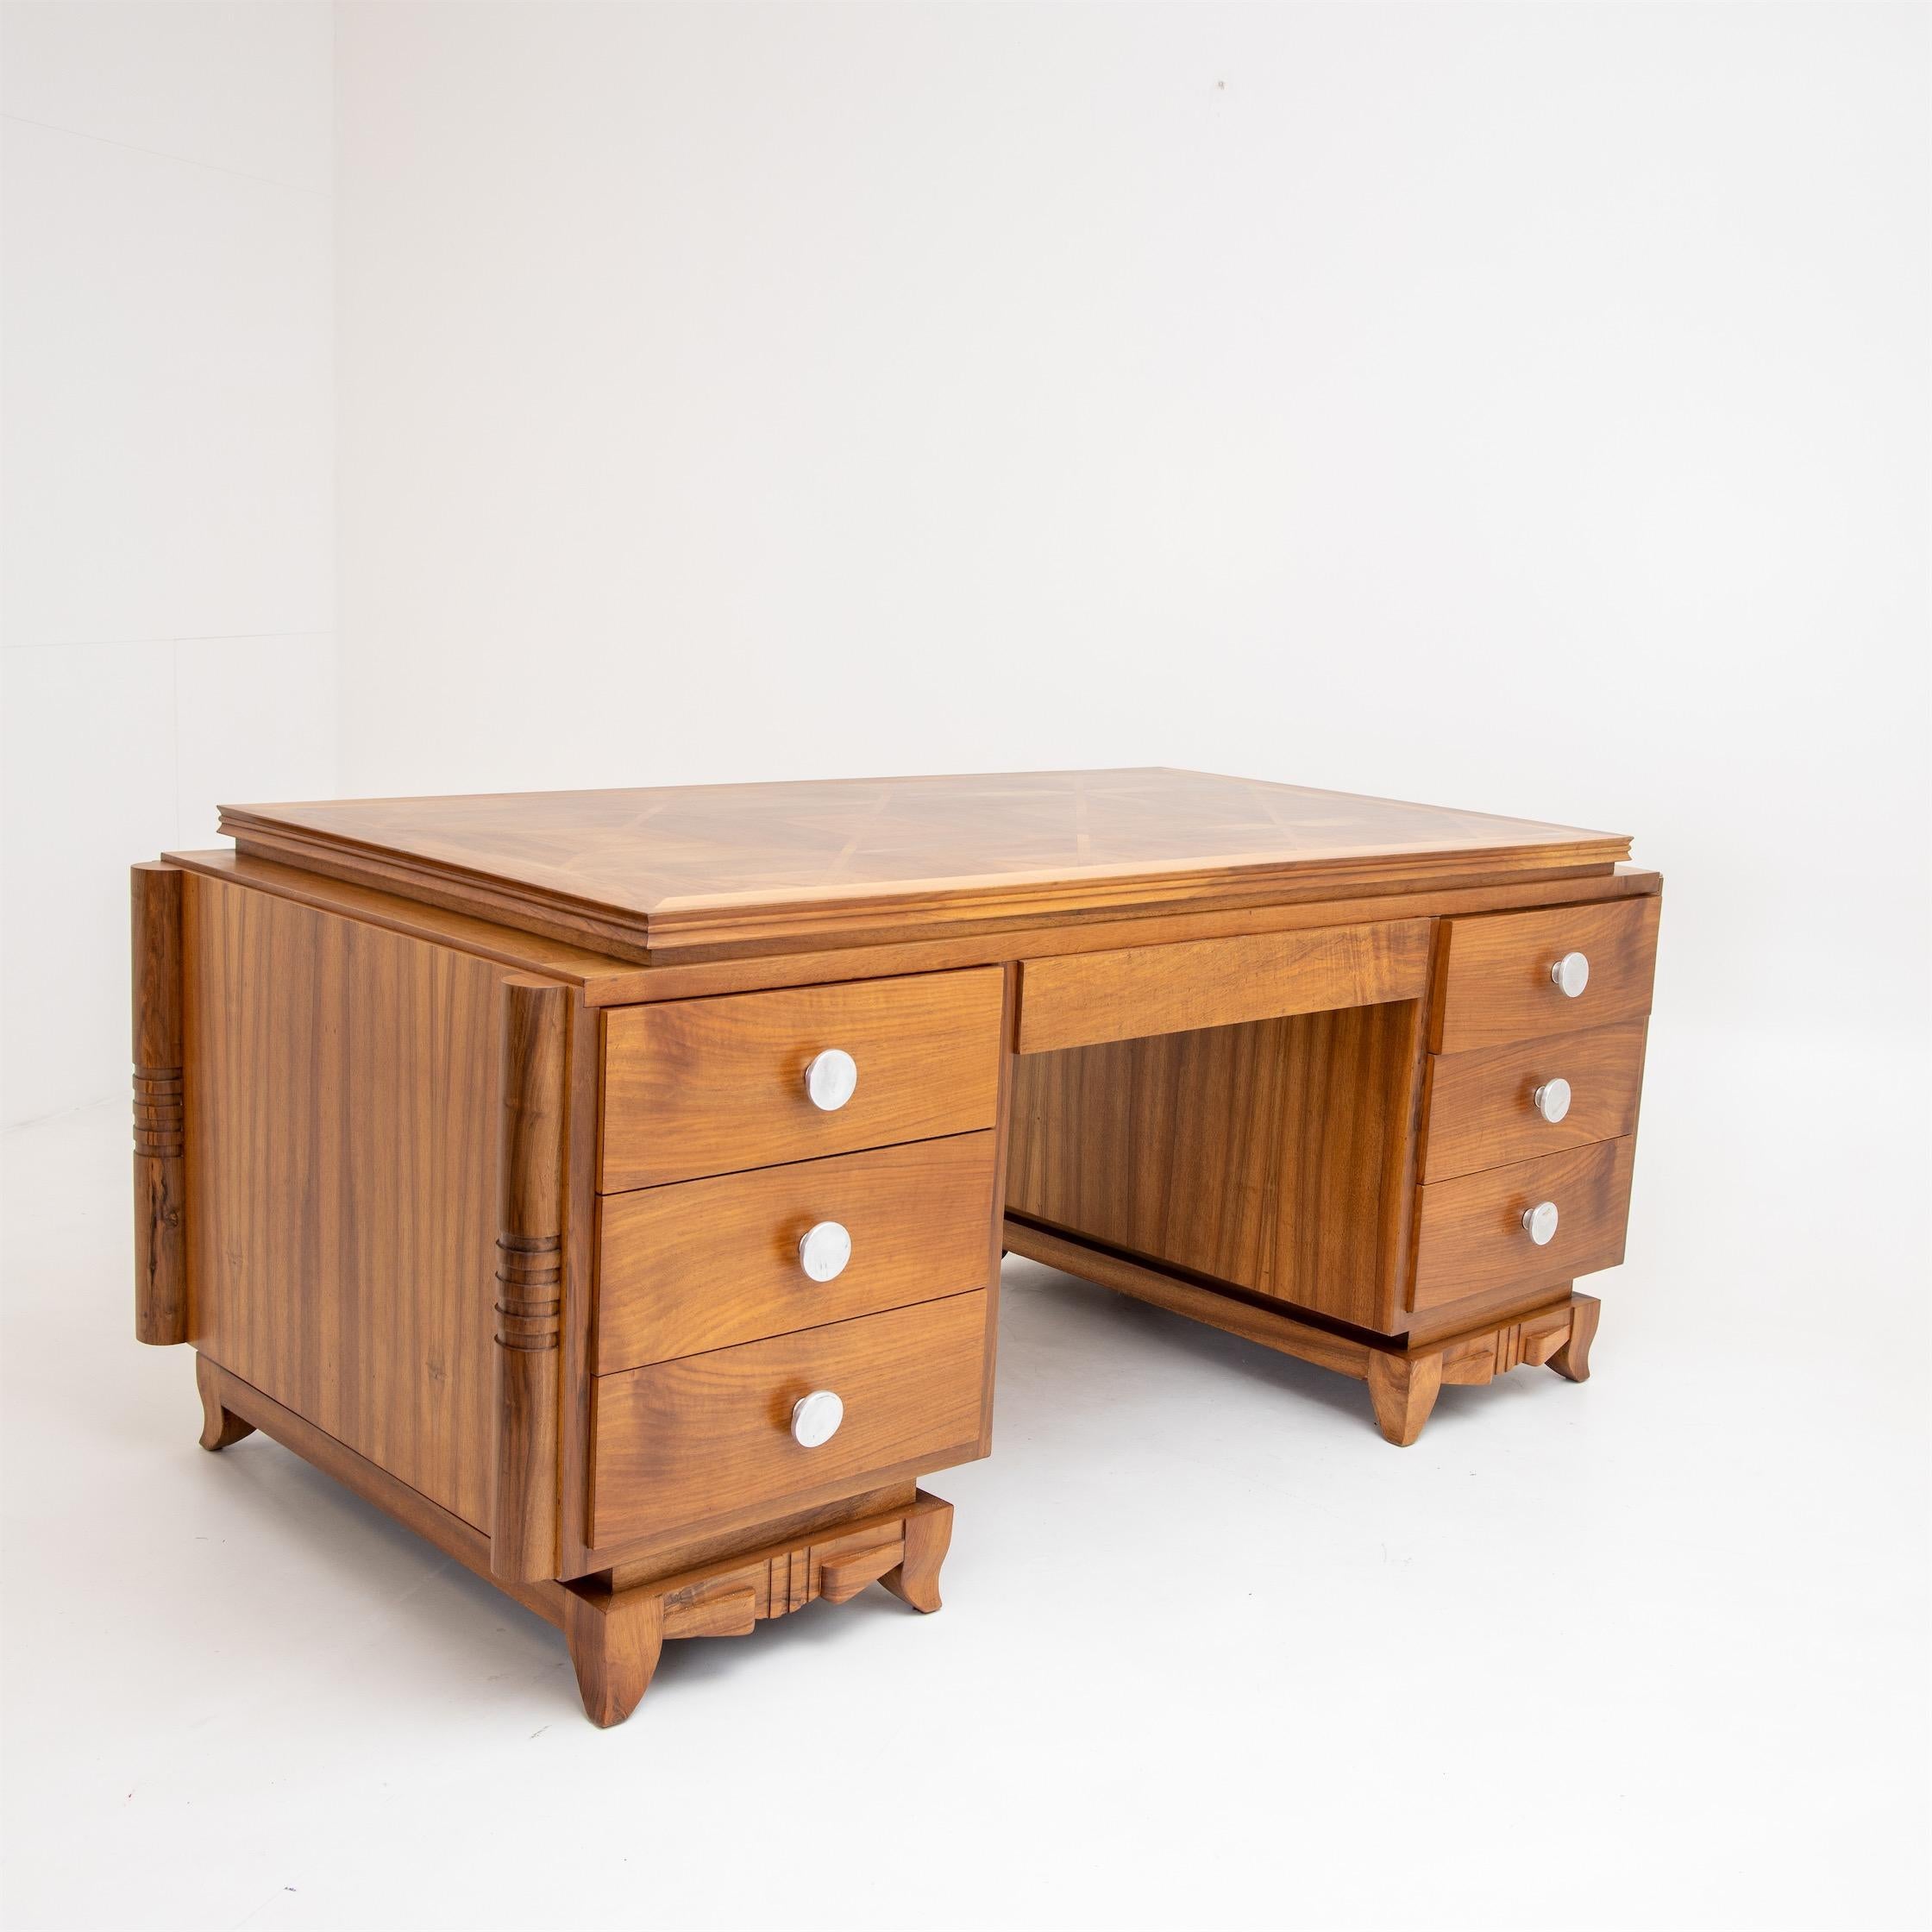 A large Art Deco desk on a finely carved stand with flared short legs and six drawers in the side panels. The corners are rounded, and the desk is veneered on all sides. The desk was professionally restored and hand polished.